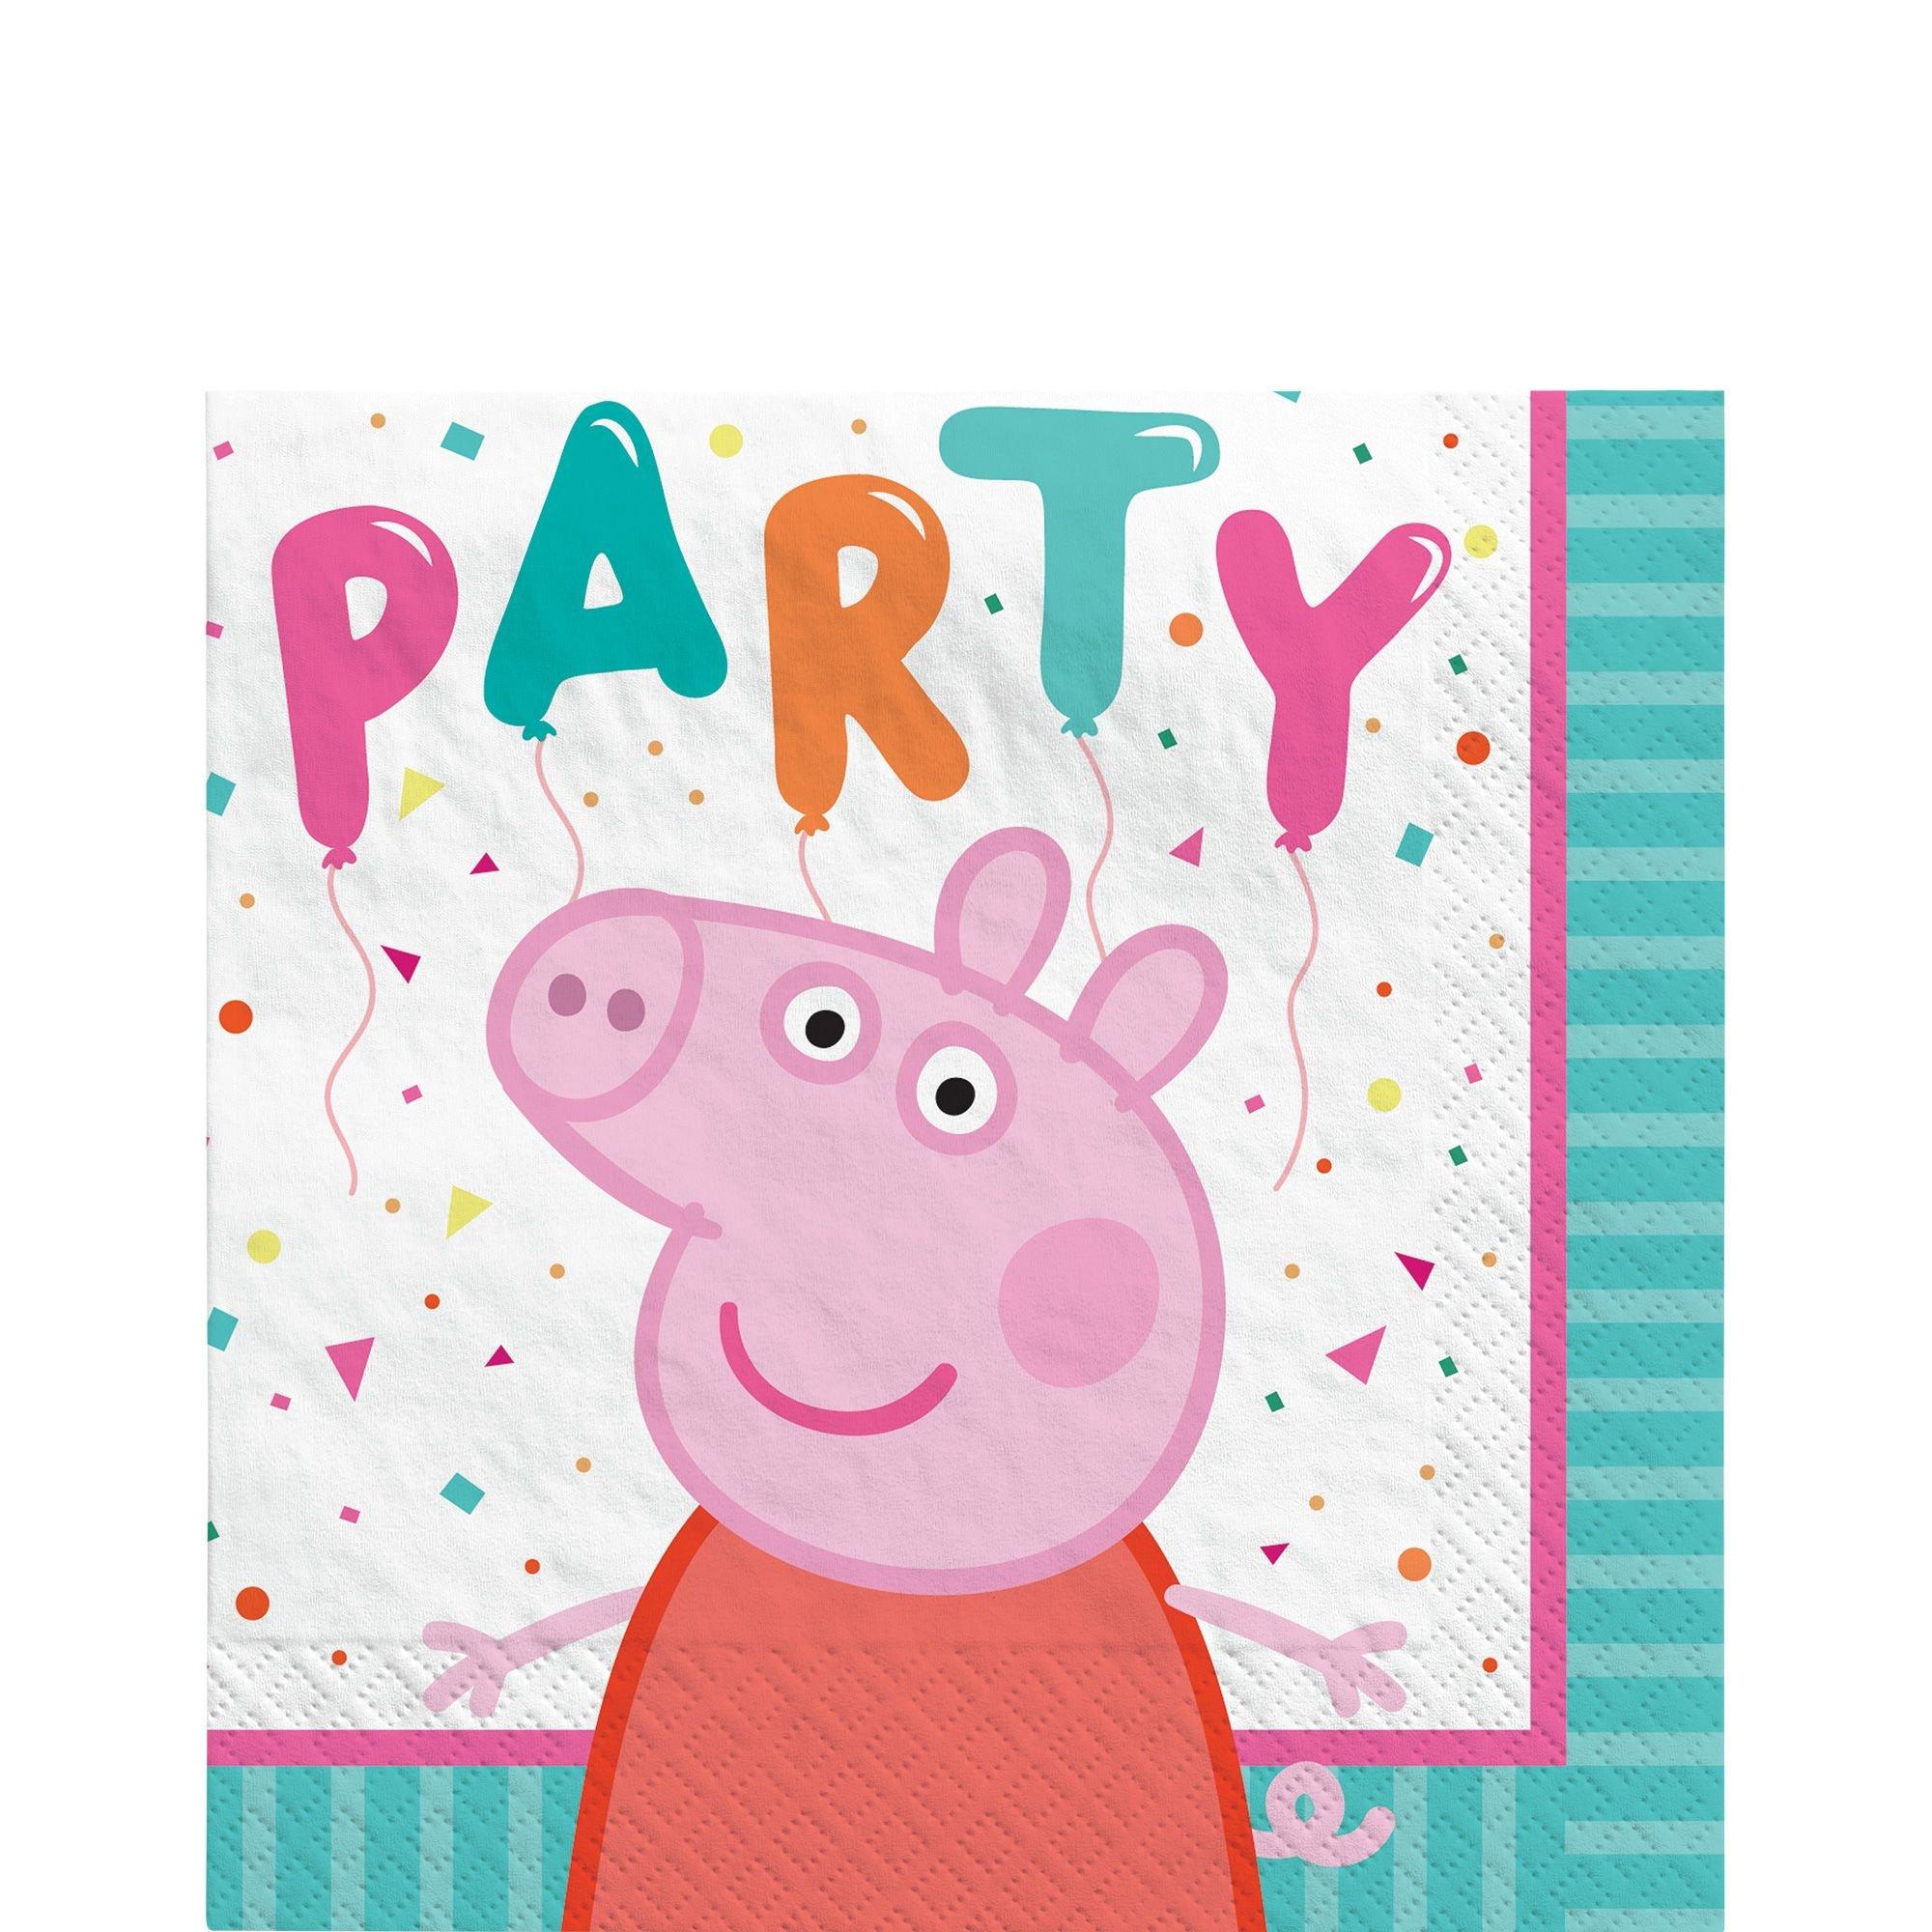 Peppa Pig Confetti Party Beverage Napkins, 5in, 16ct